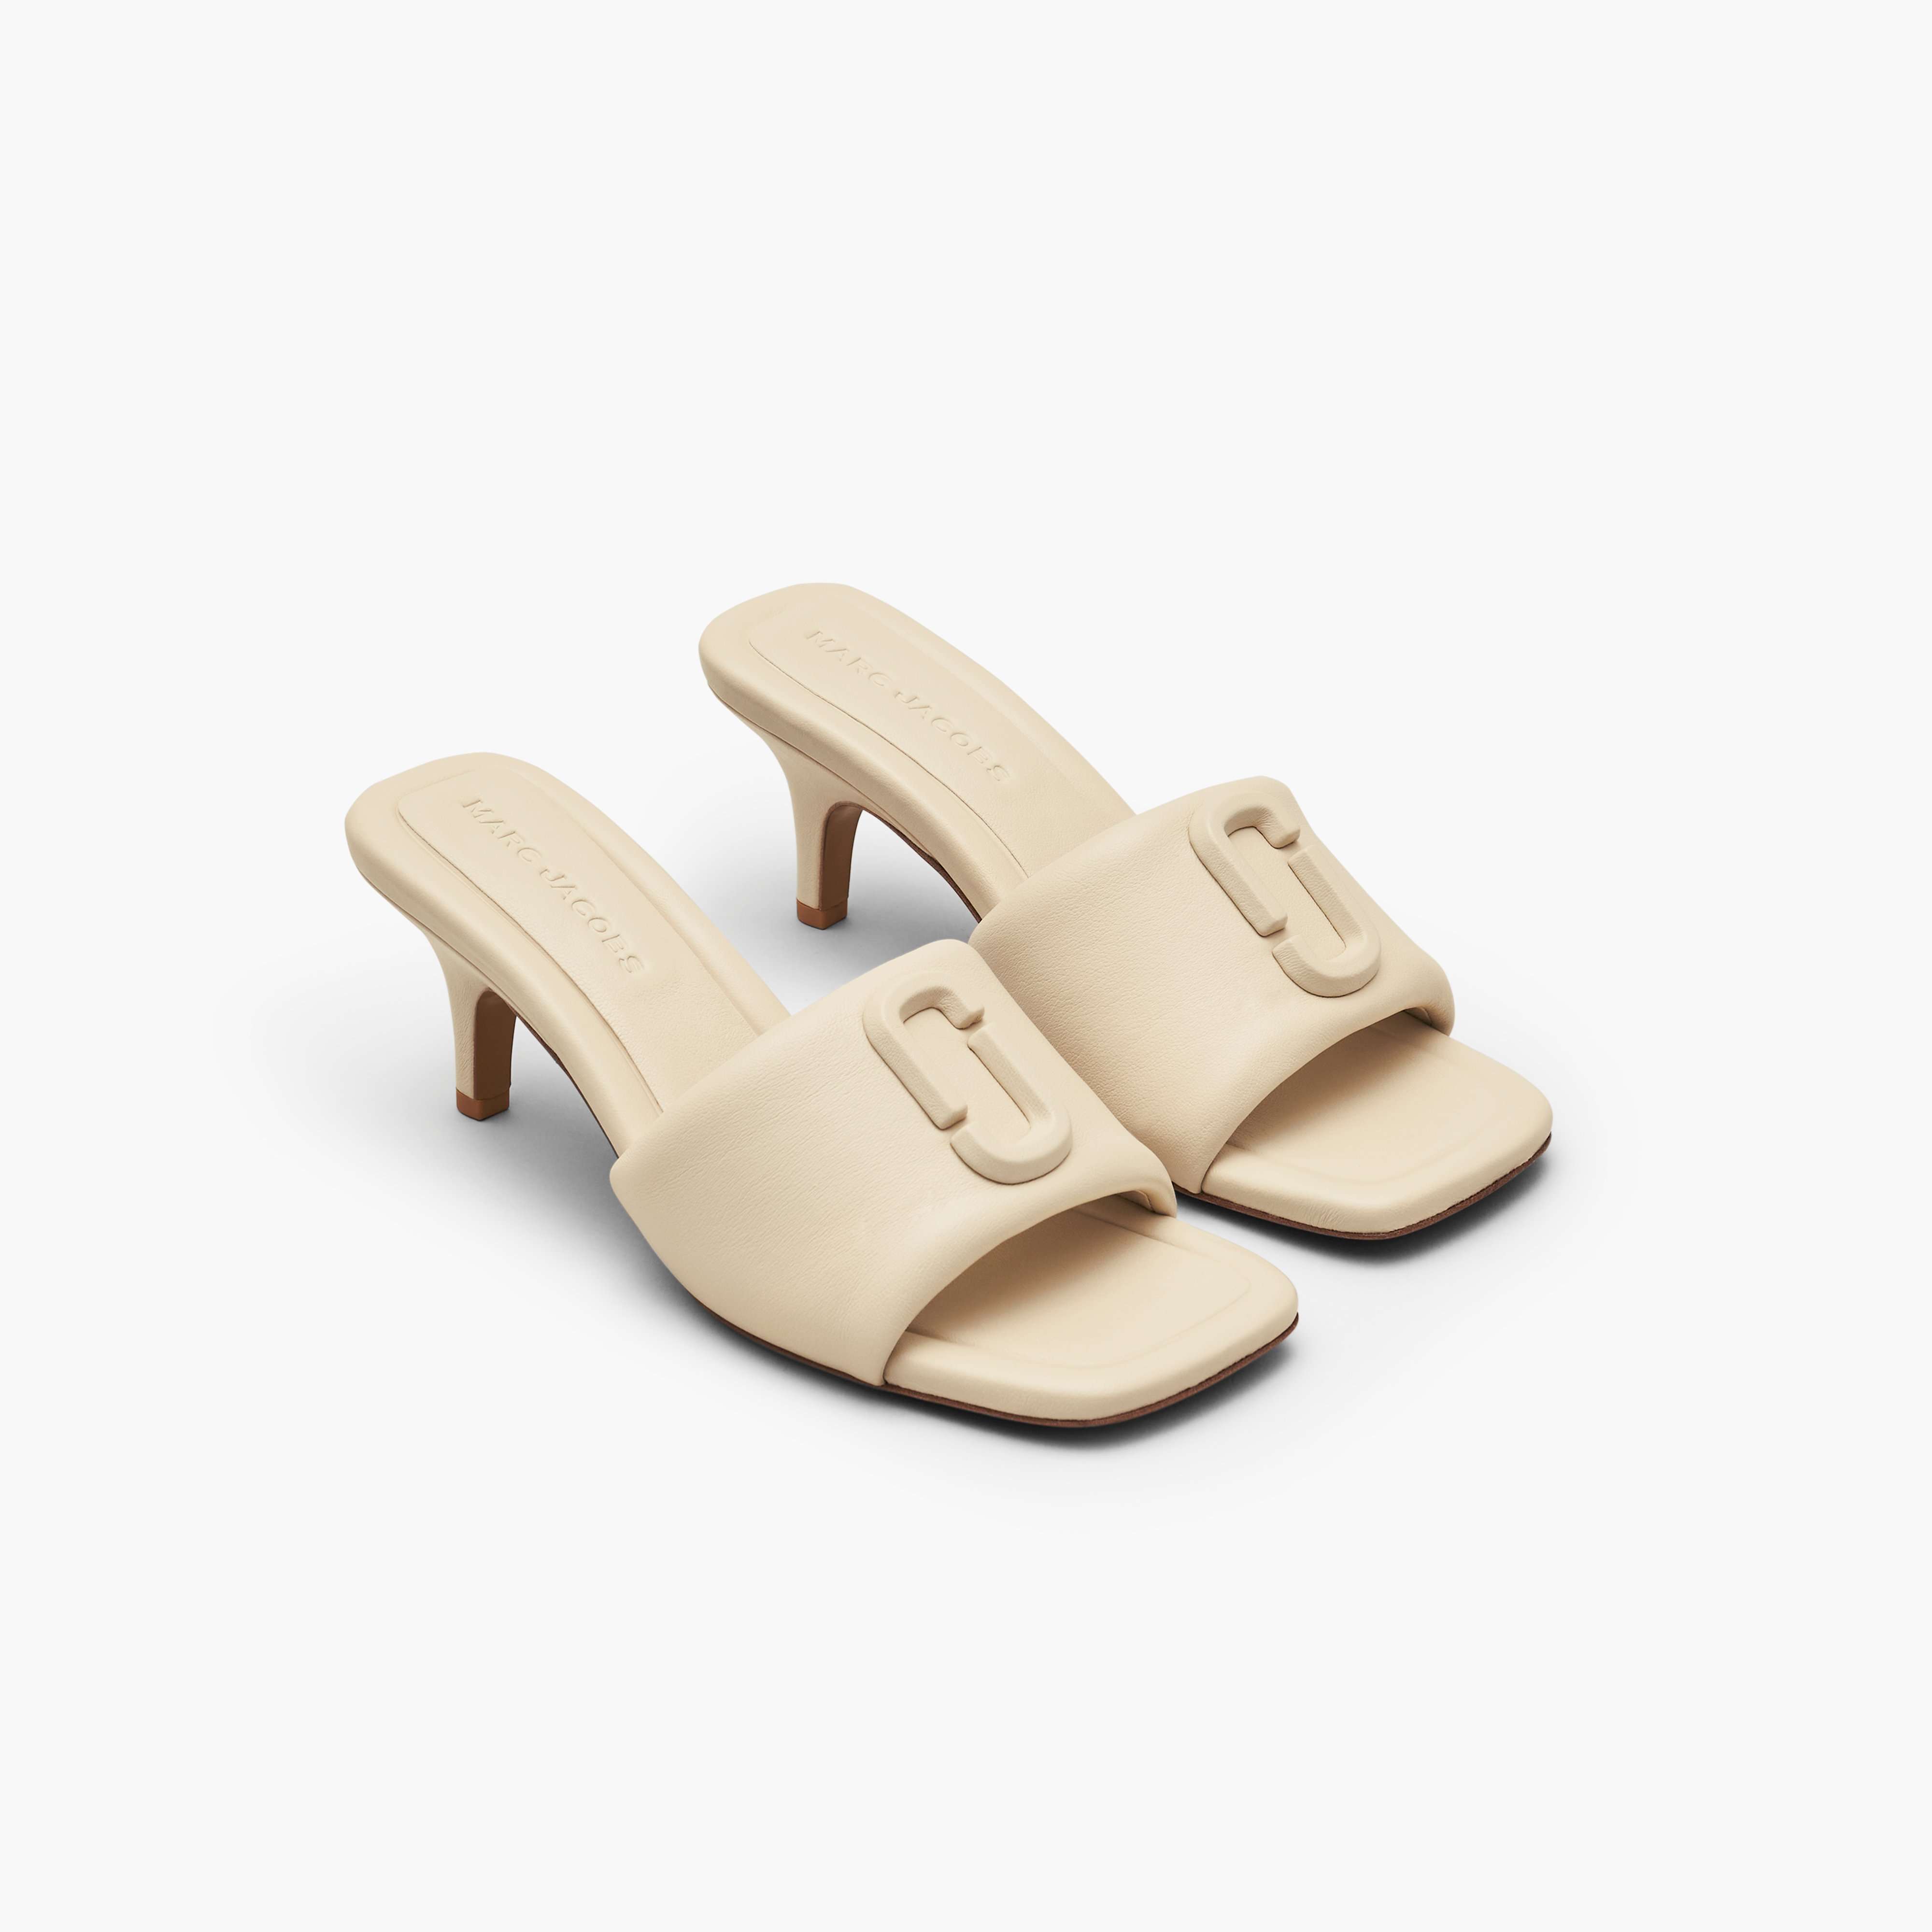 The Leather J Marc Heeled Sandal in Cloud White